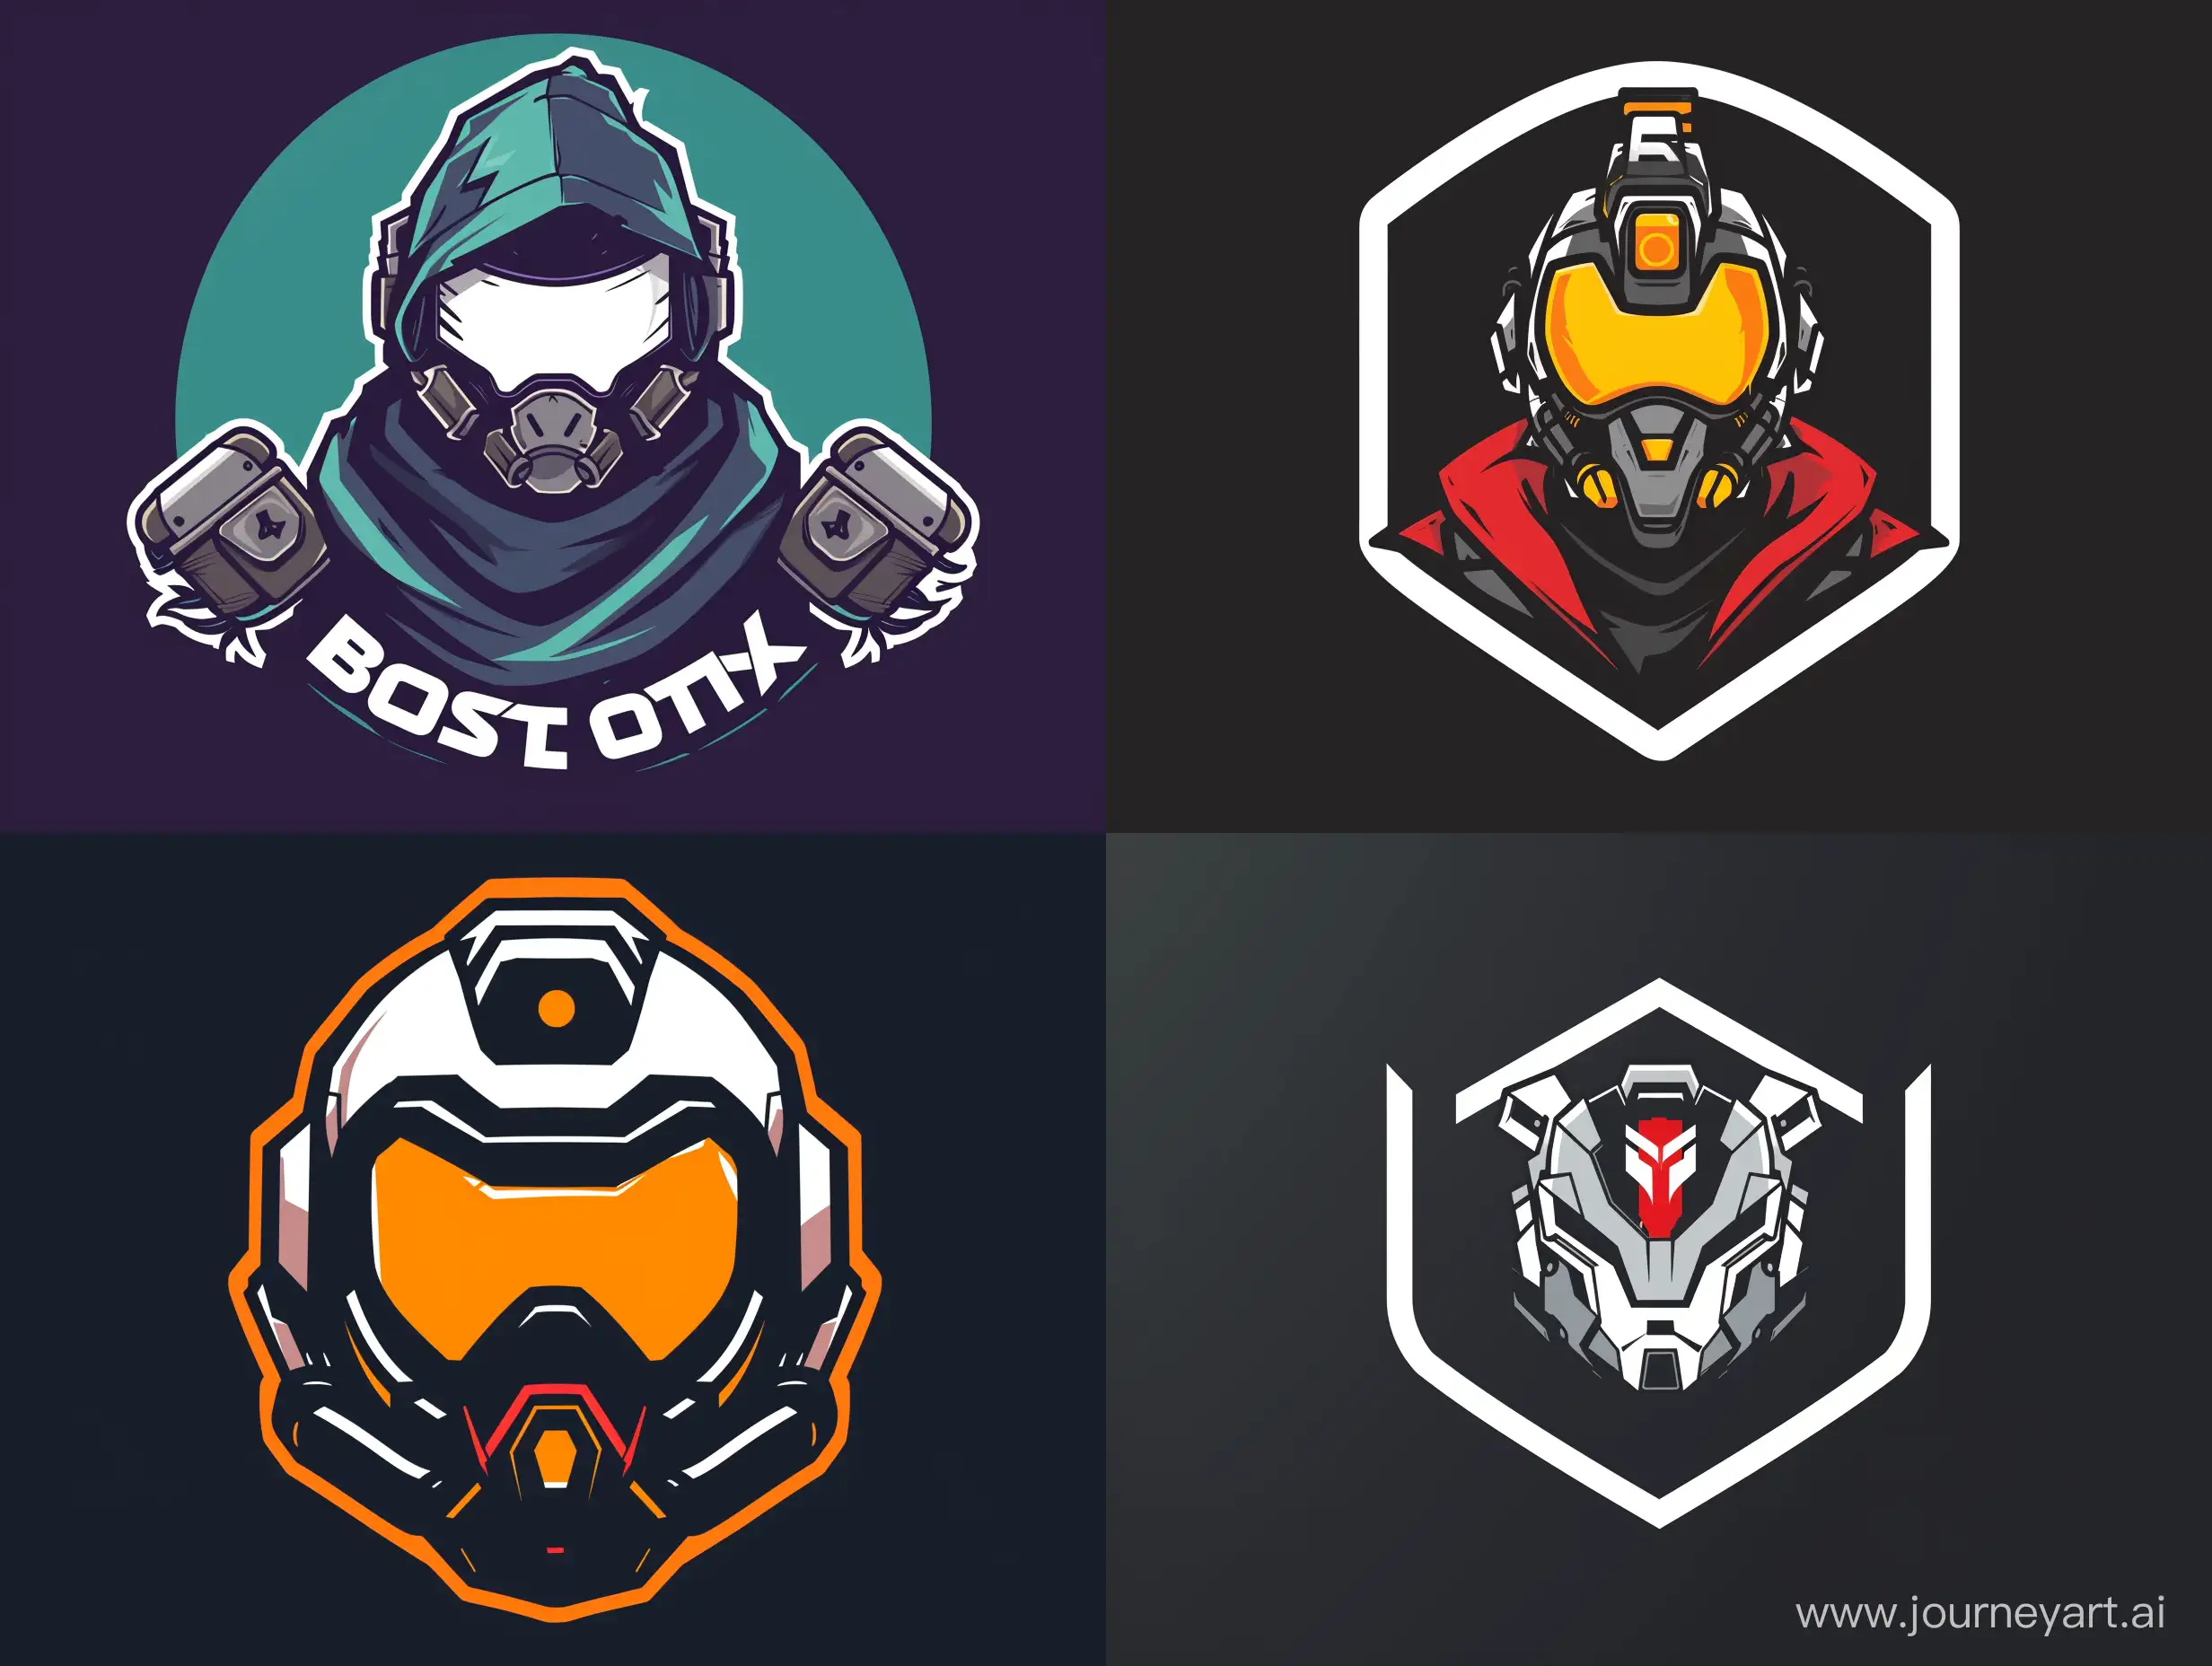 "Create a logo for the Apex Legends esports team called Based Bots using an abbreviation or ideas without letters and words"